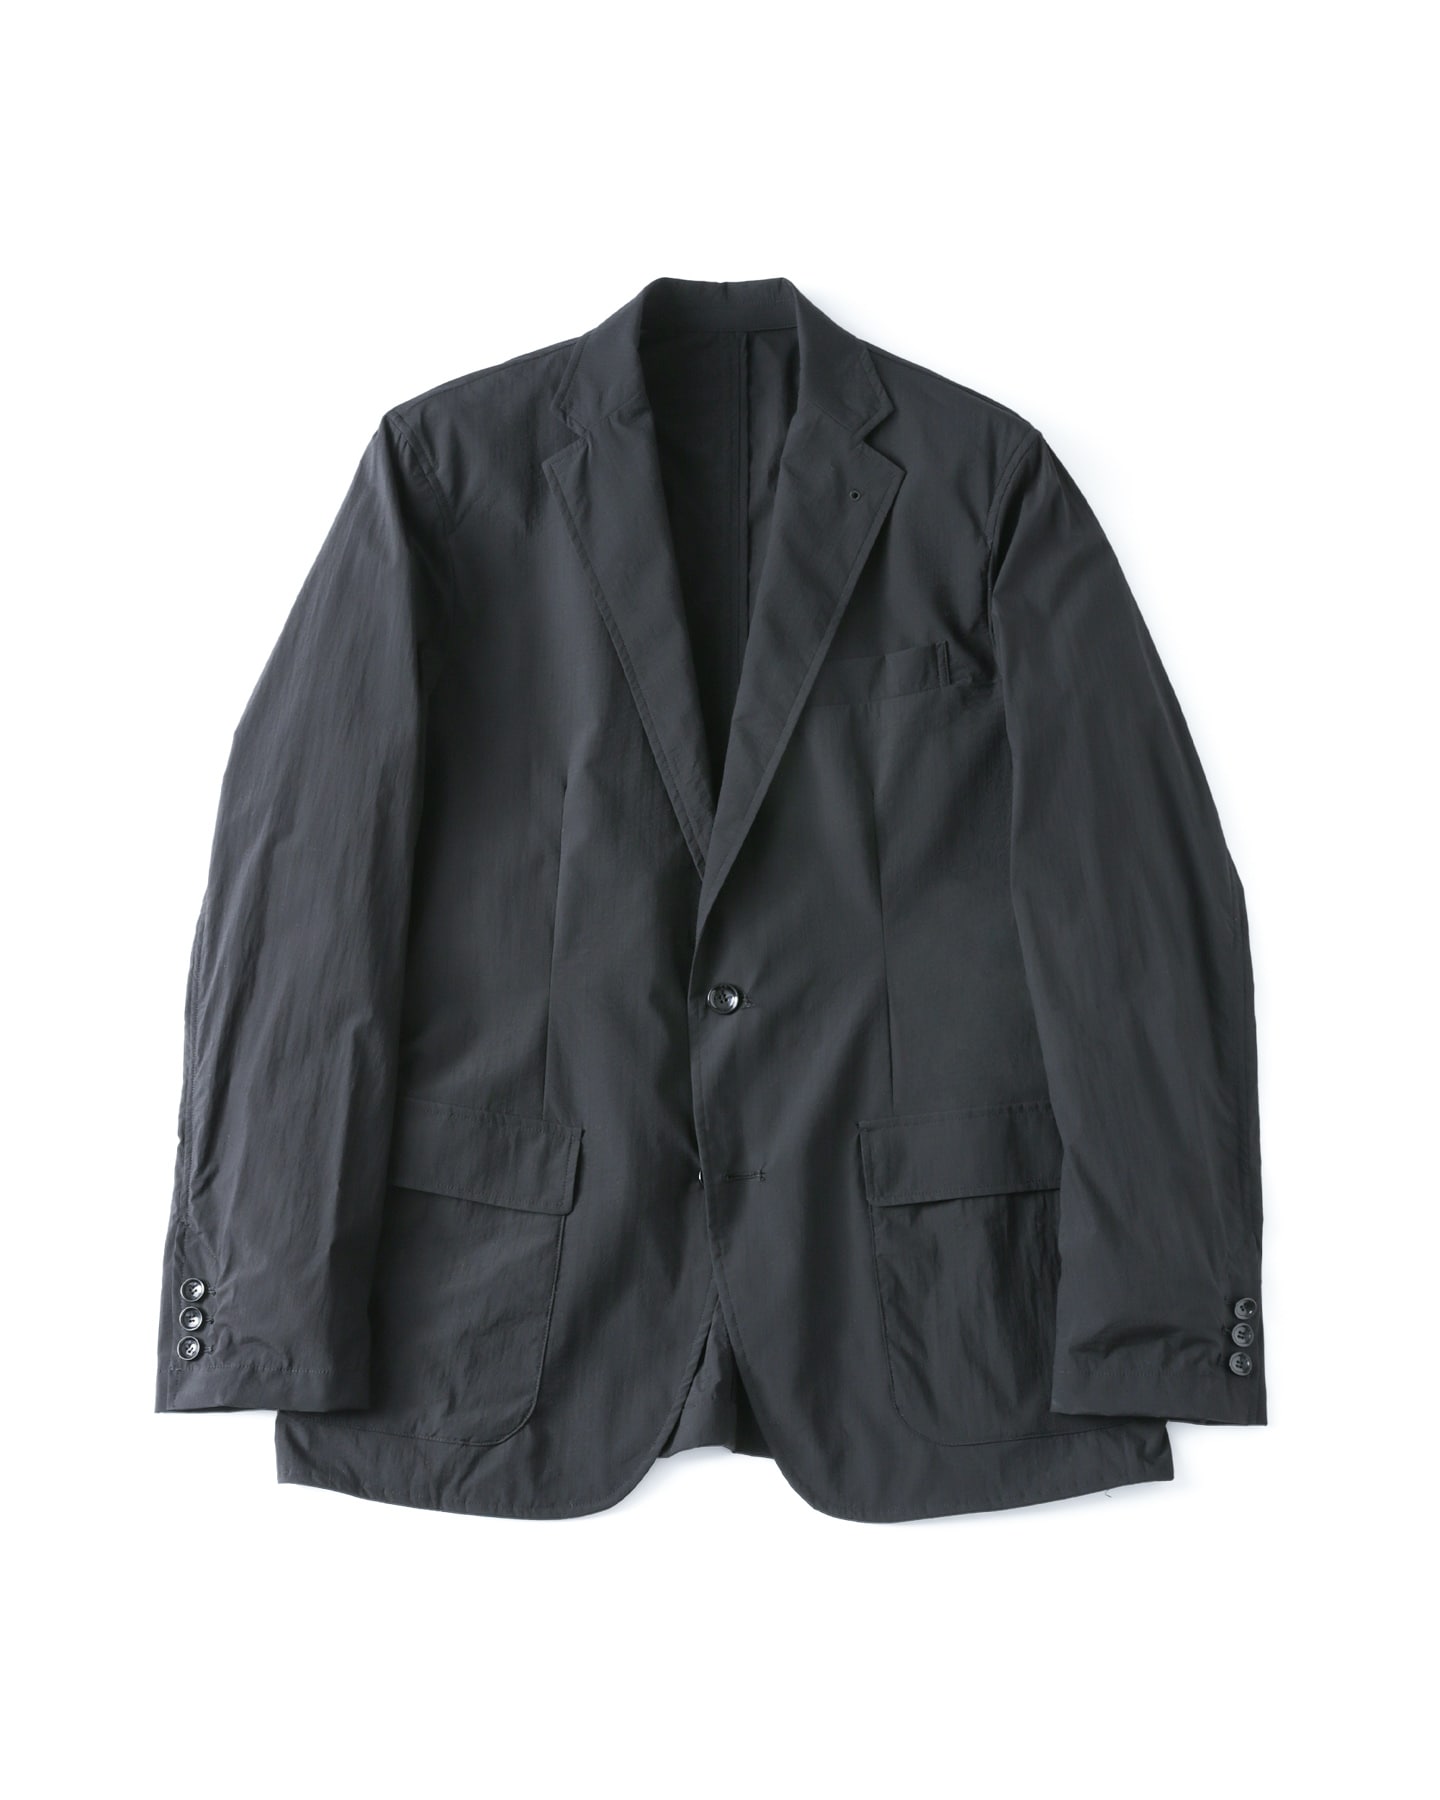 SOPH. | LIGHT WEIGHT STRETCH RIP STOP PACKABLE 2B JACKET(M BLACK):